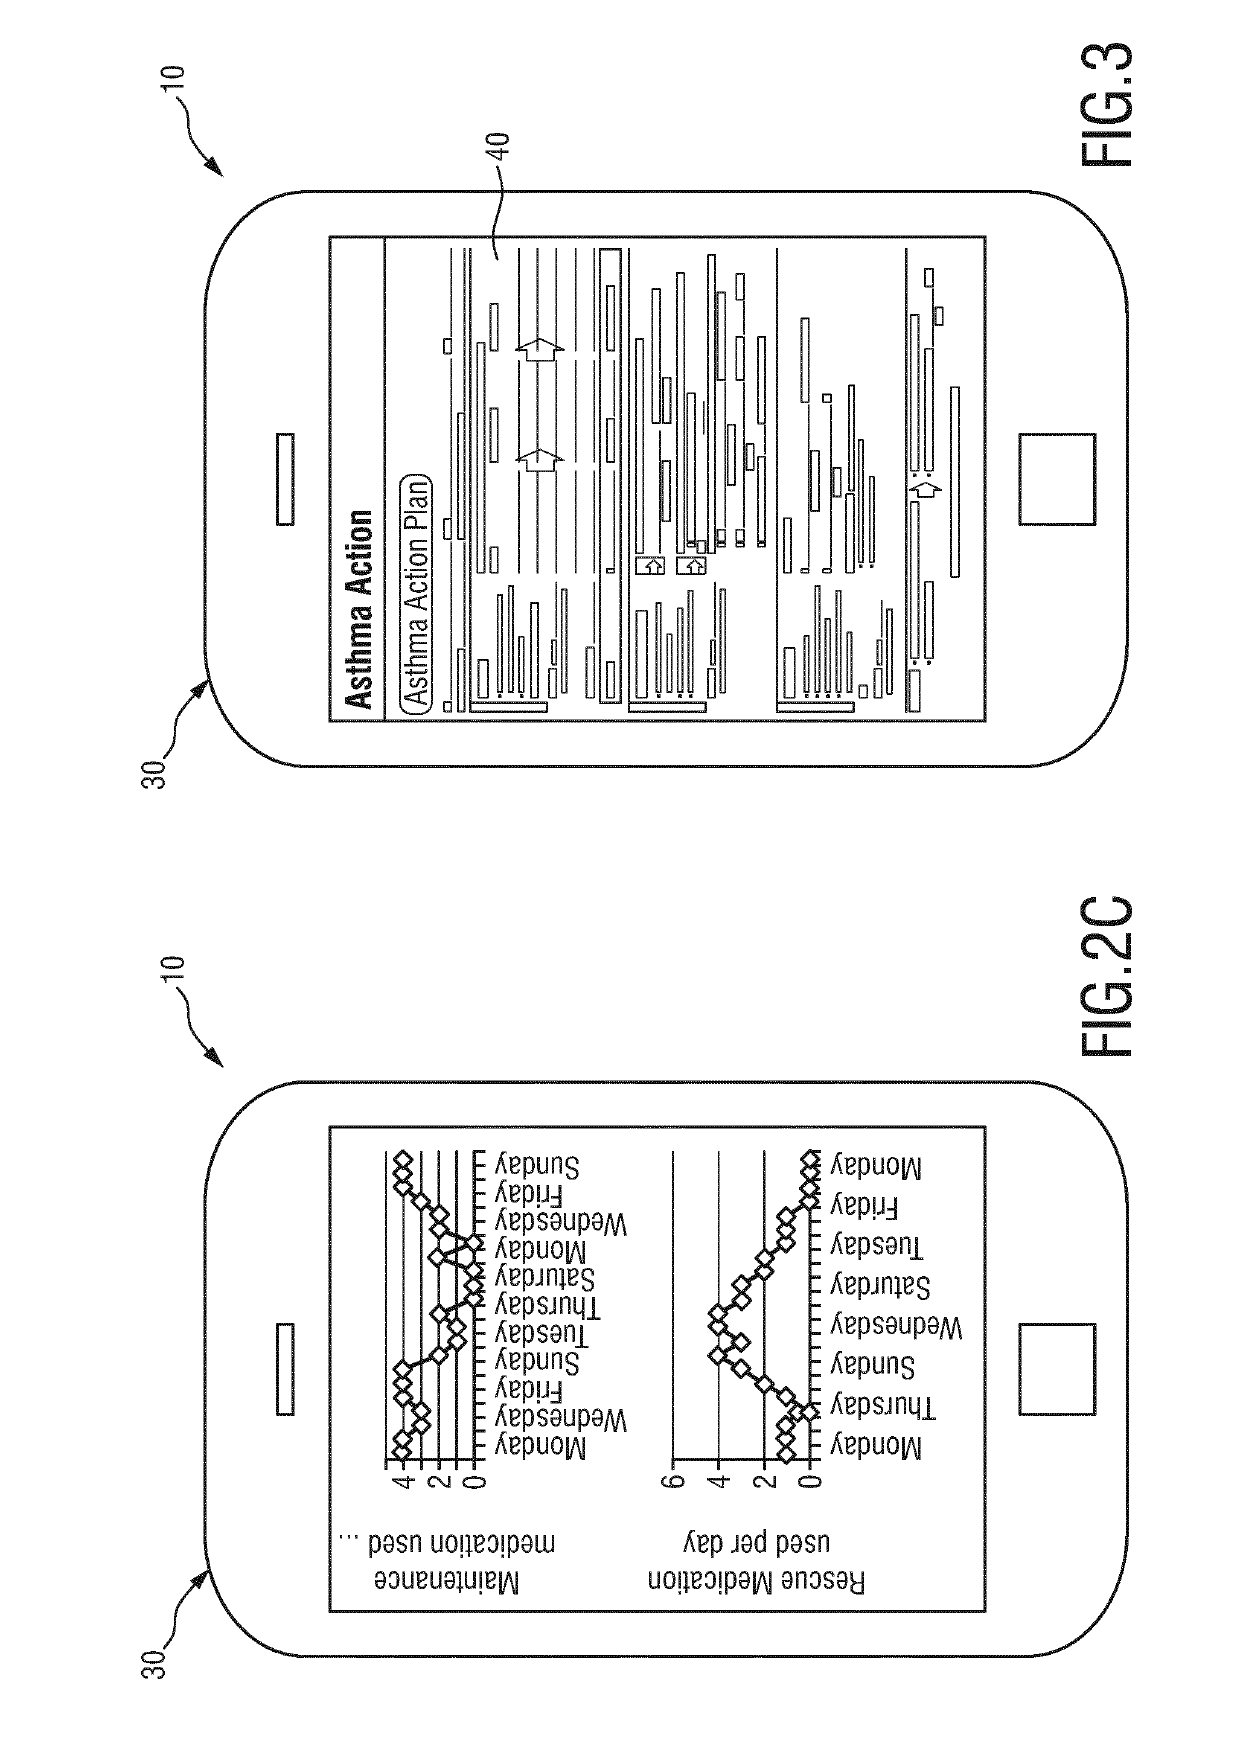 System and method for monitoring asthma symptoms